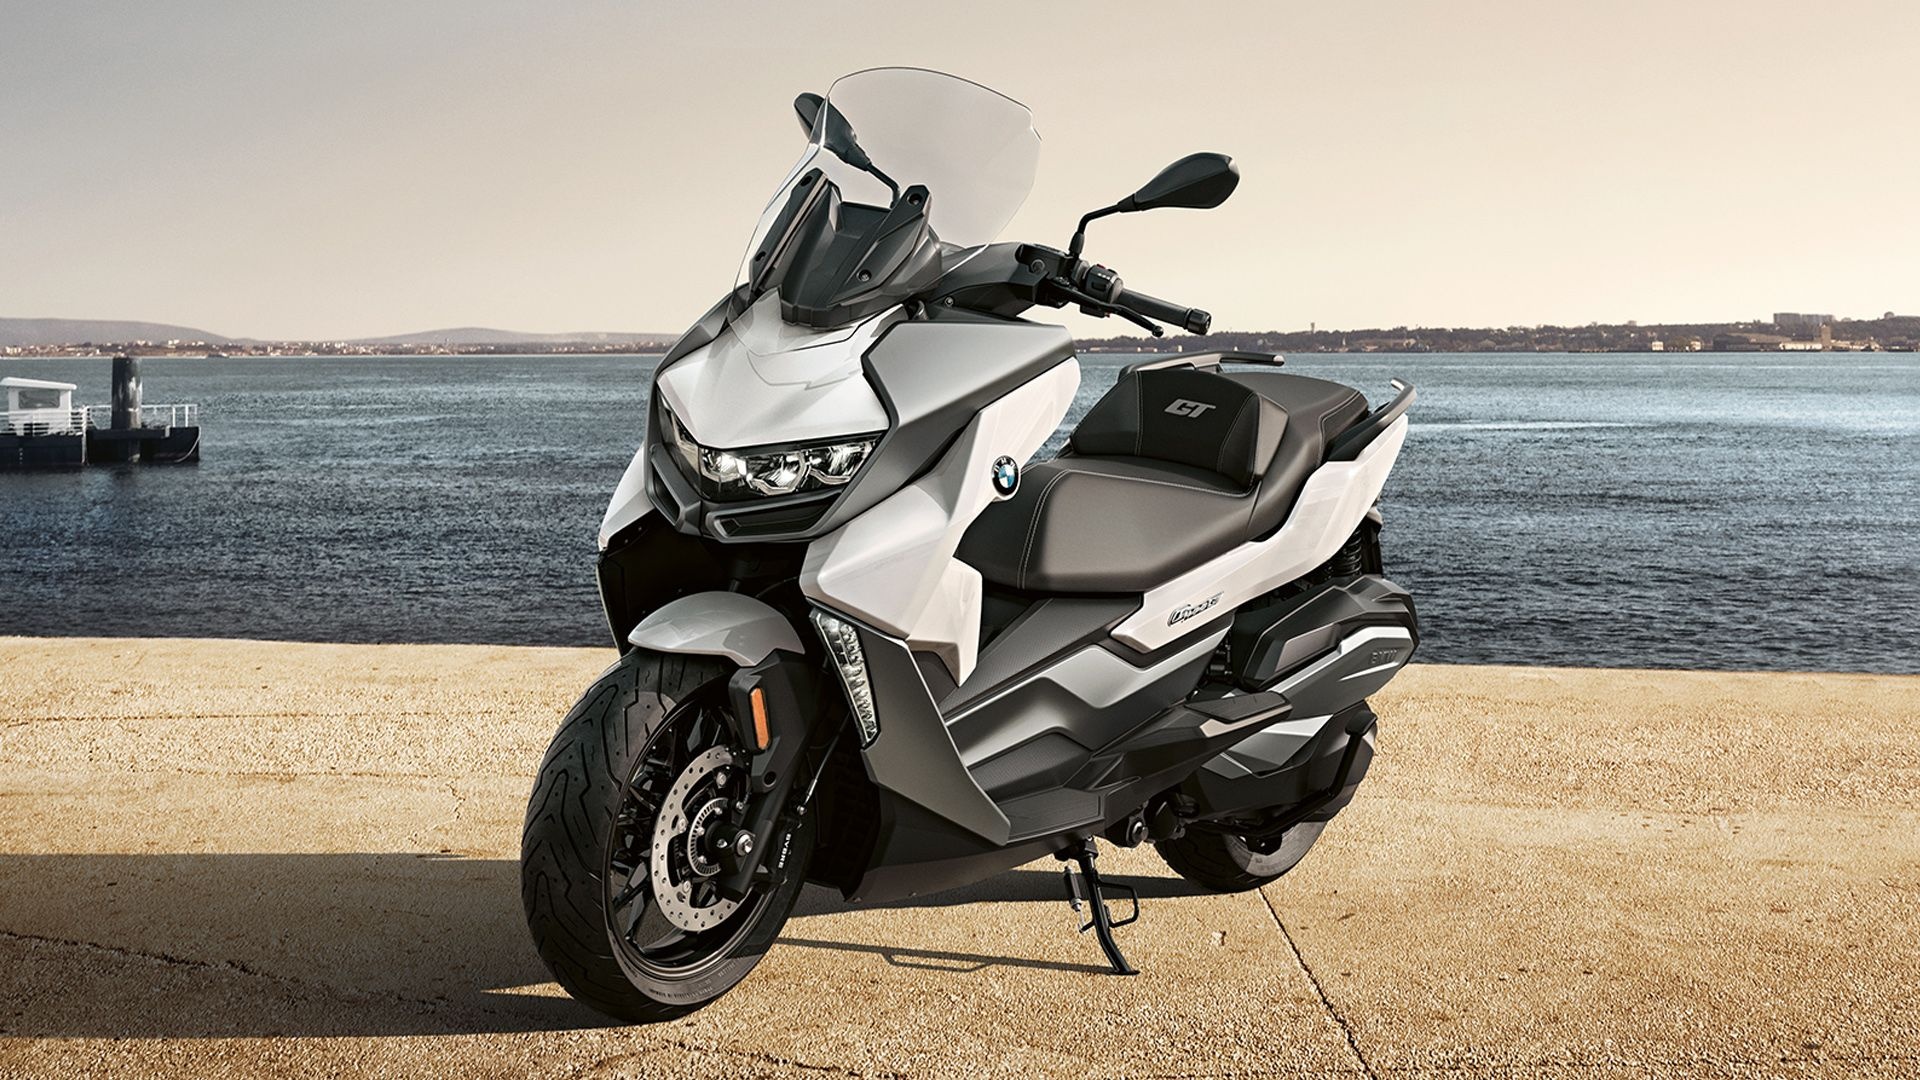 BMW C 400 GT, Exceptional performance, BMW Motorrad excellence, Dynamic scooter, 1920x1080 Full HD Desktop